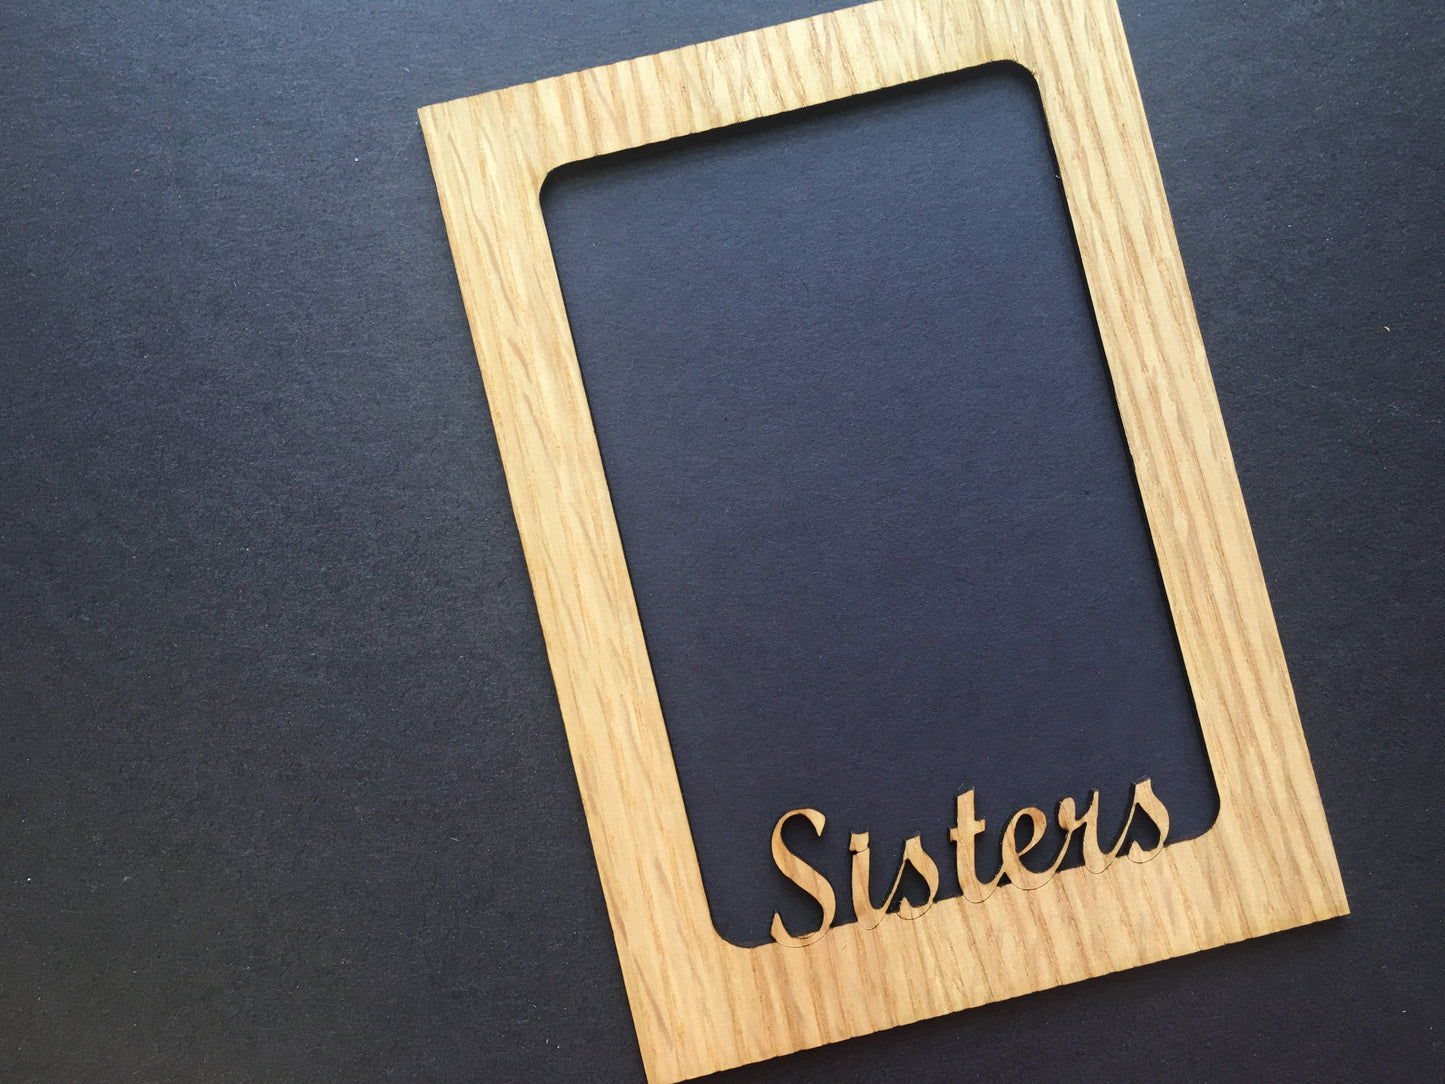 5x7 Sisters Picture Frame, Picture Frame, home decor, laser engraved - Legacy Images